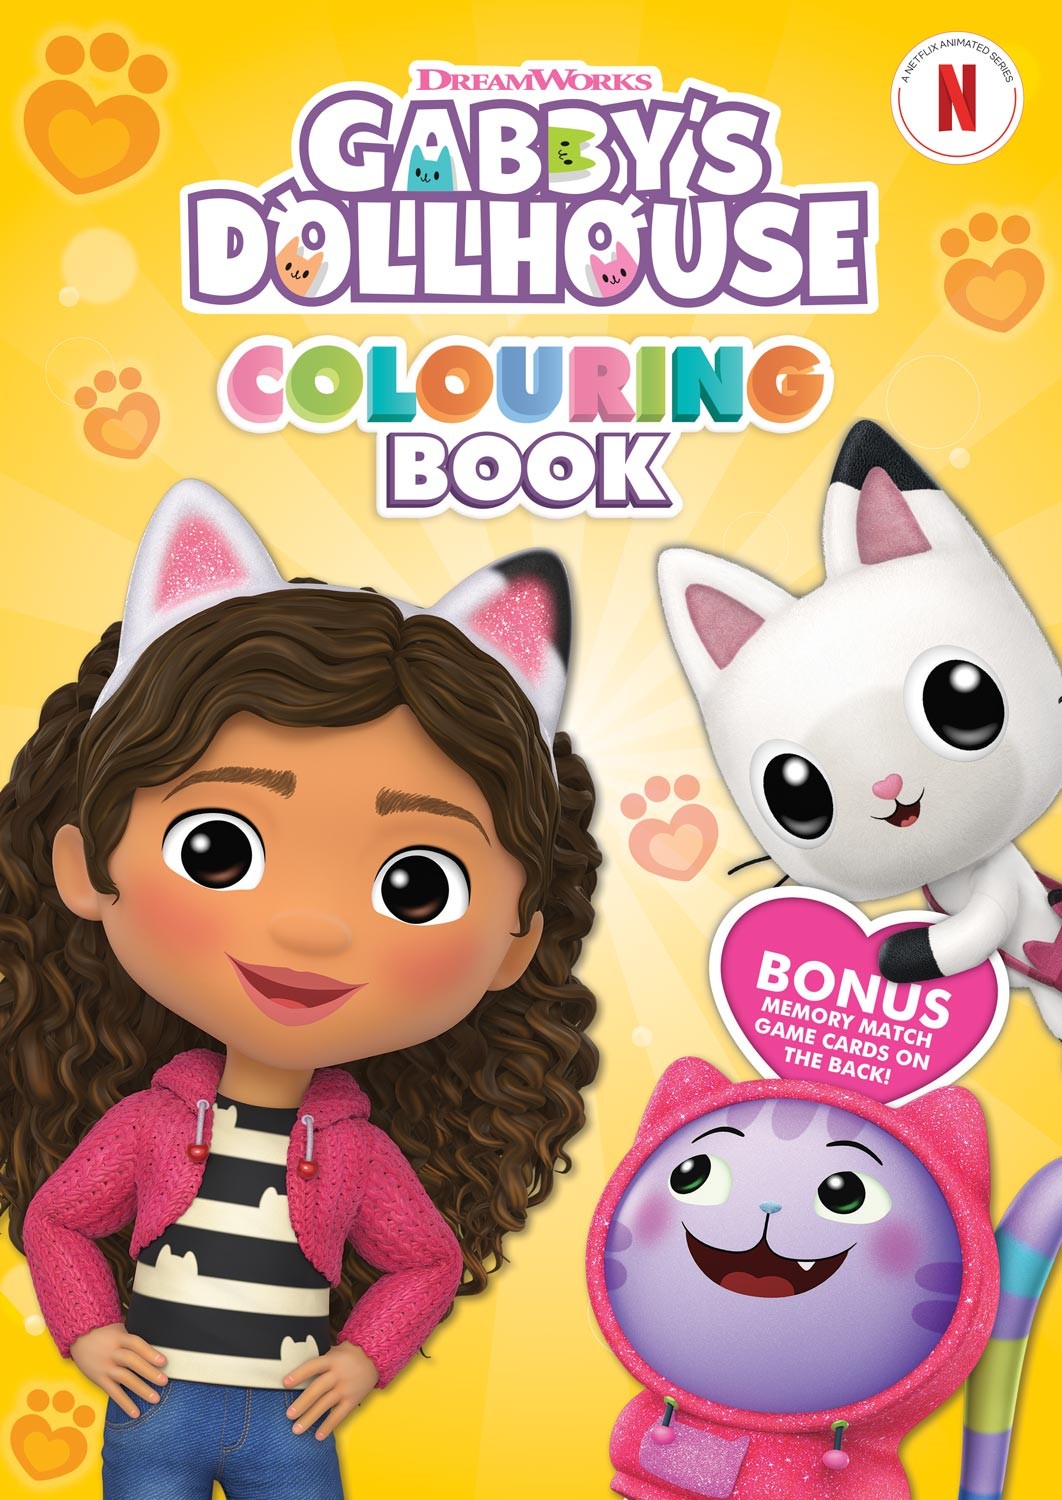 View Gabbys Dollhouse Colouring Book information